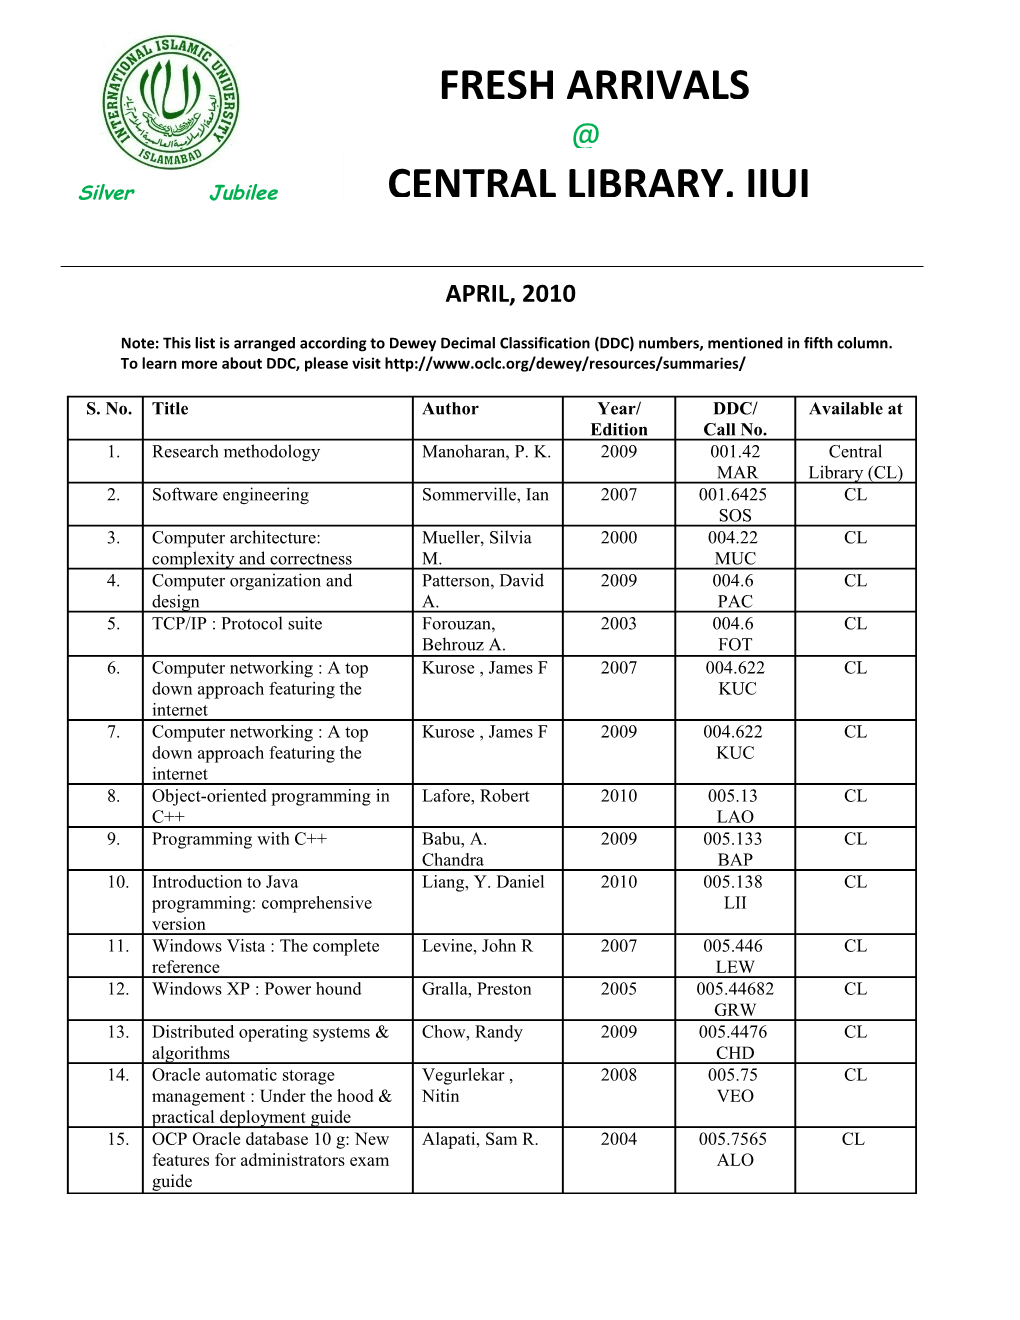 Note: This List Is Arranged According to Dewey Decimal Classification (DDC) Numbers, Mentioned